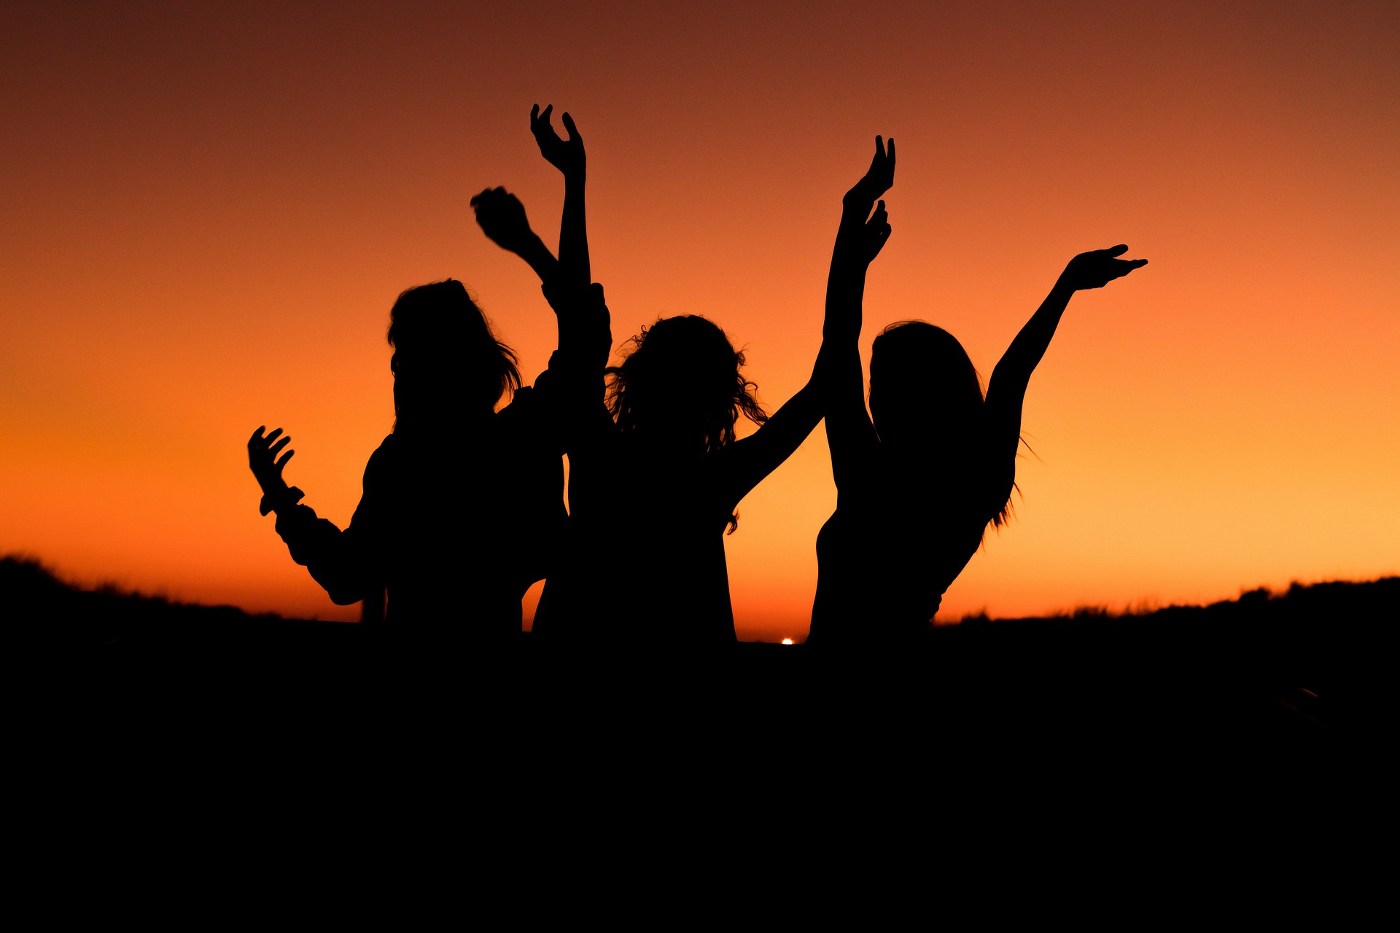 Silhouettes of three young people dancing - Best camping activities for teens